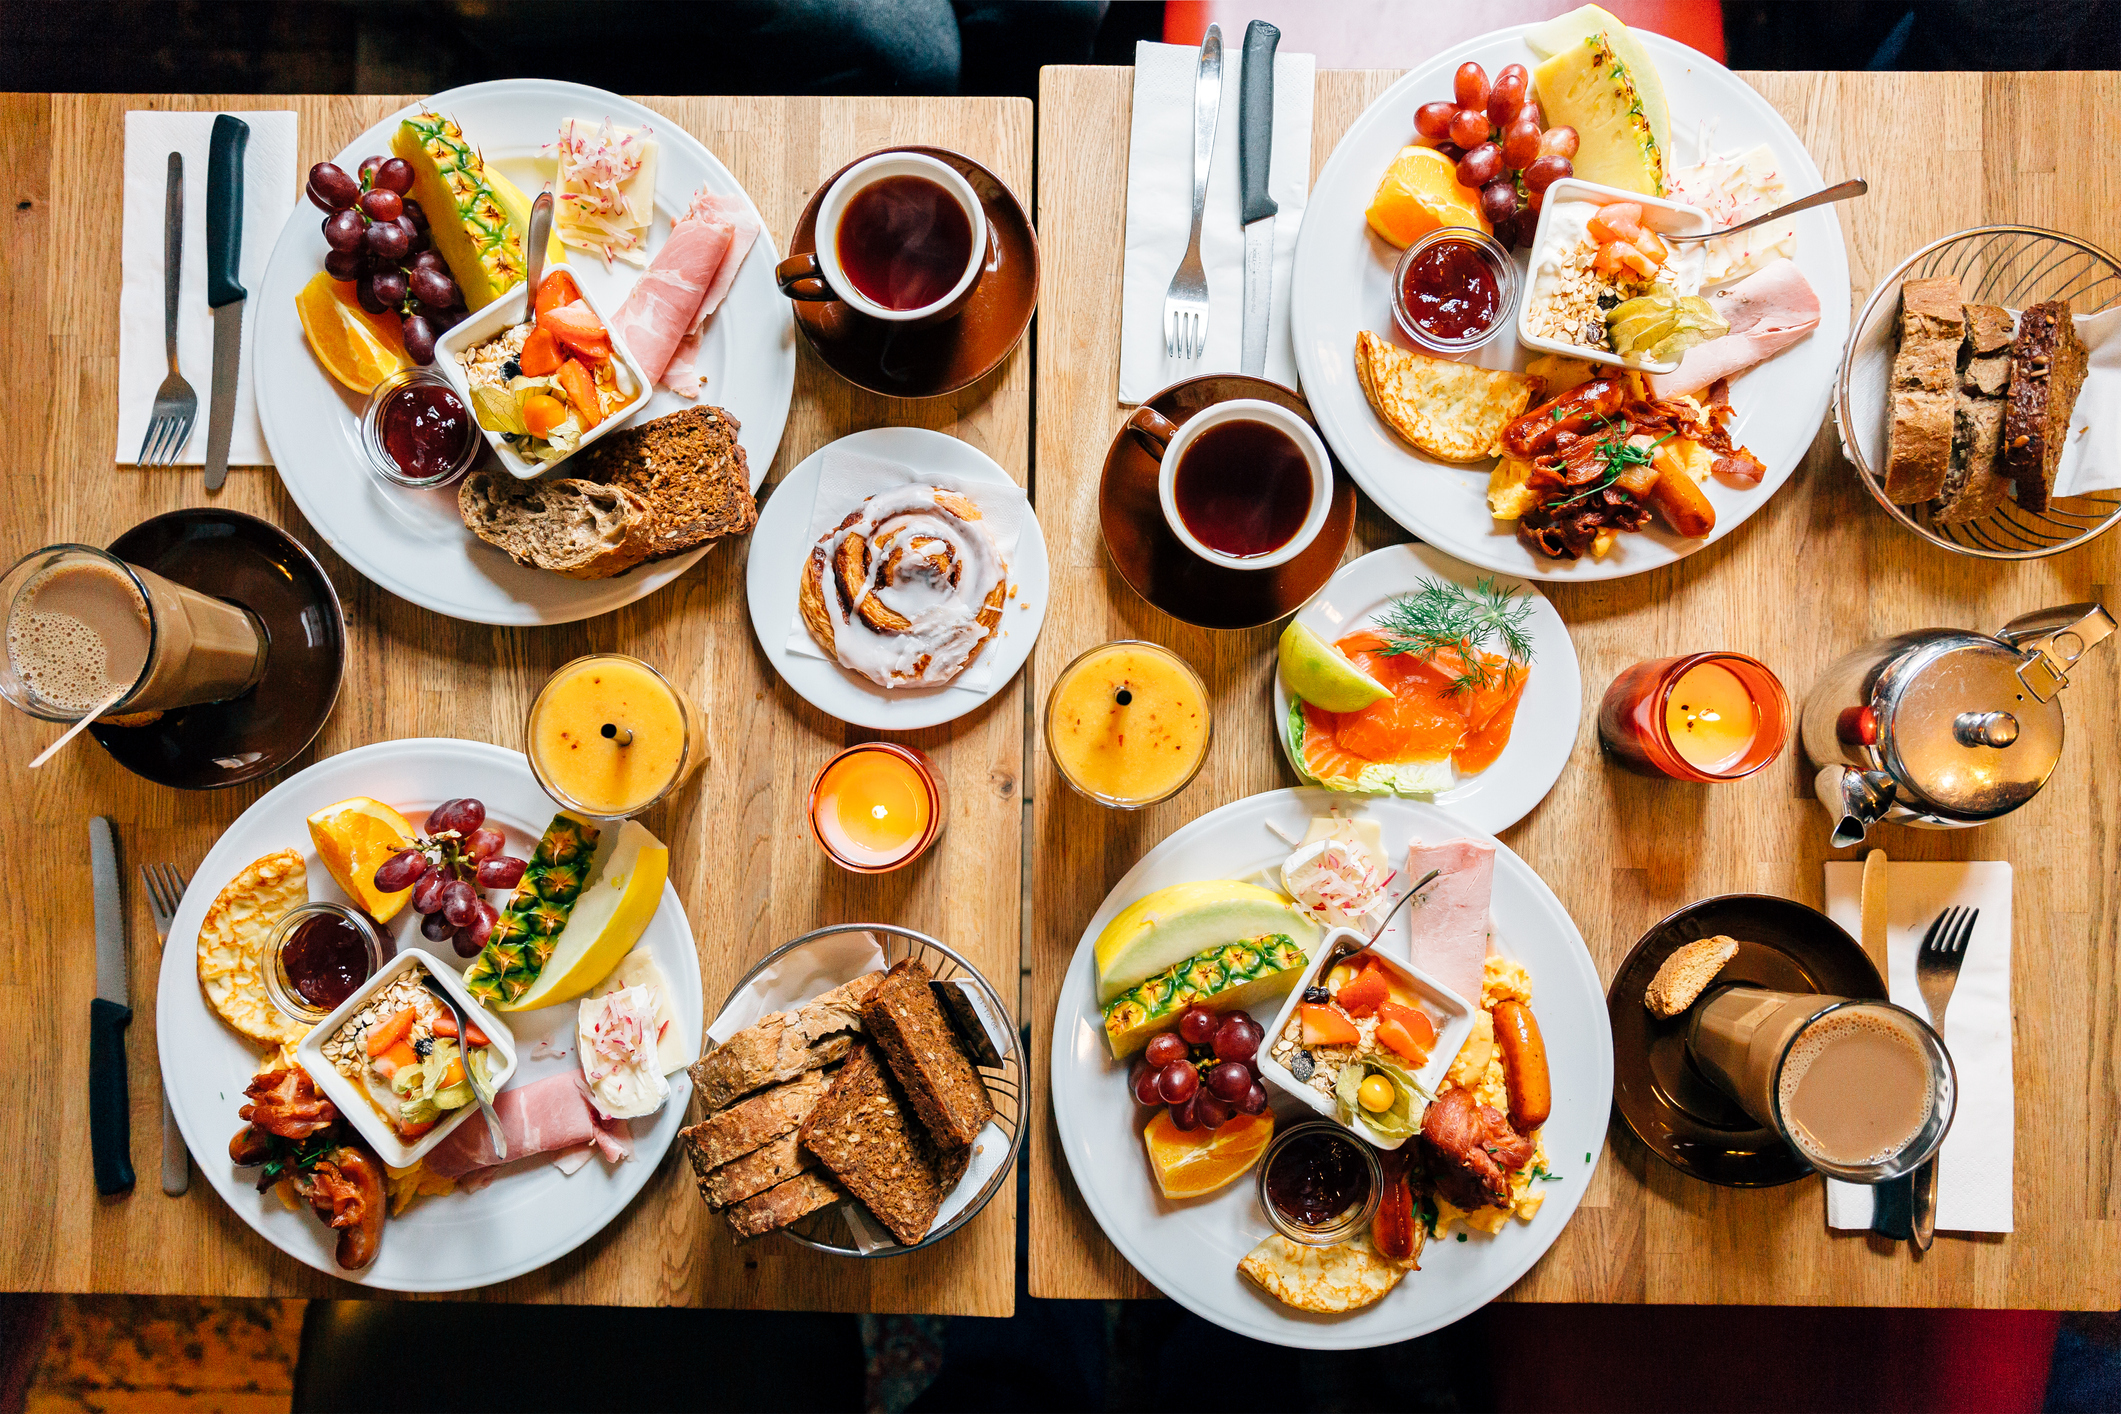 Delicious brunch spread on a table from above.